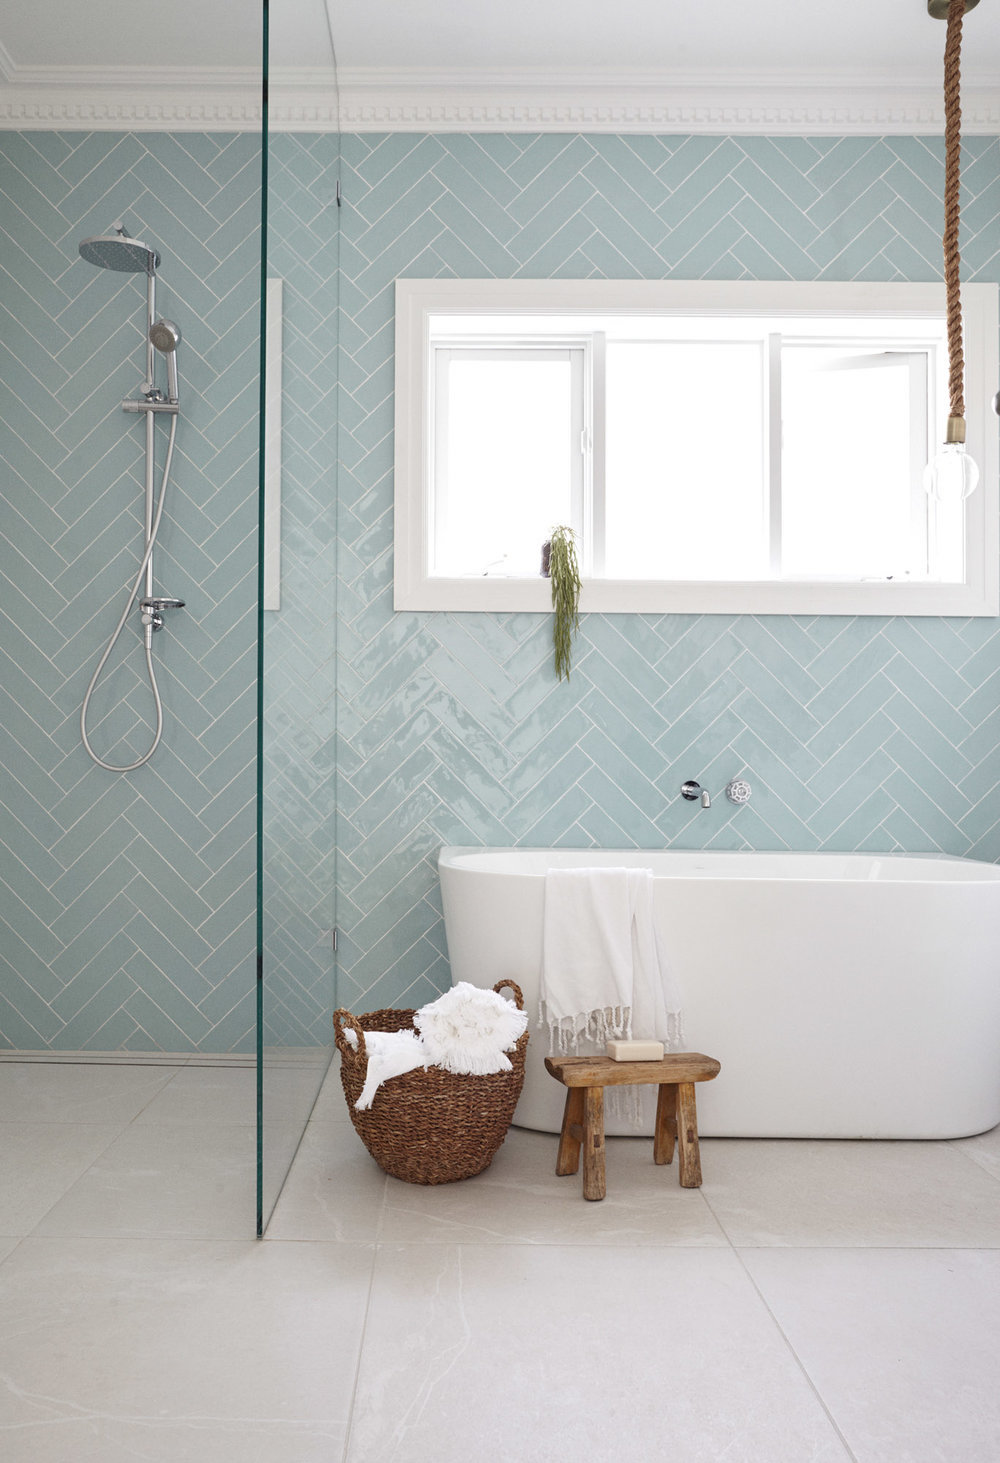 Bathroom with baby blue herringbone tiling on walls and white tub